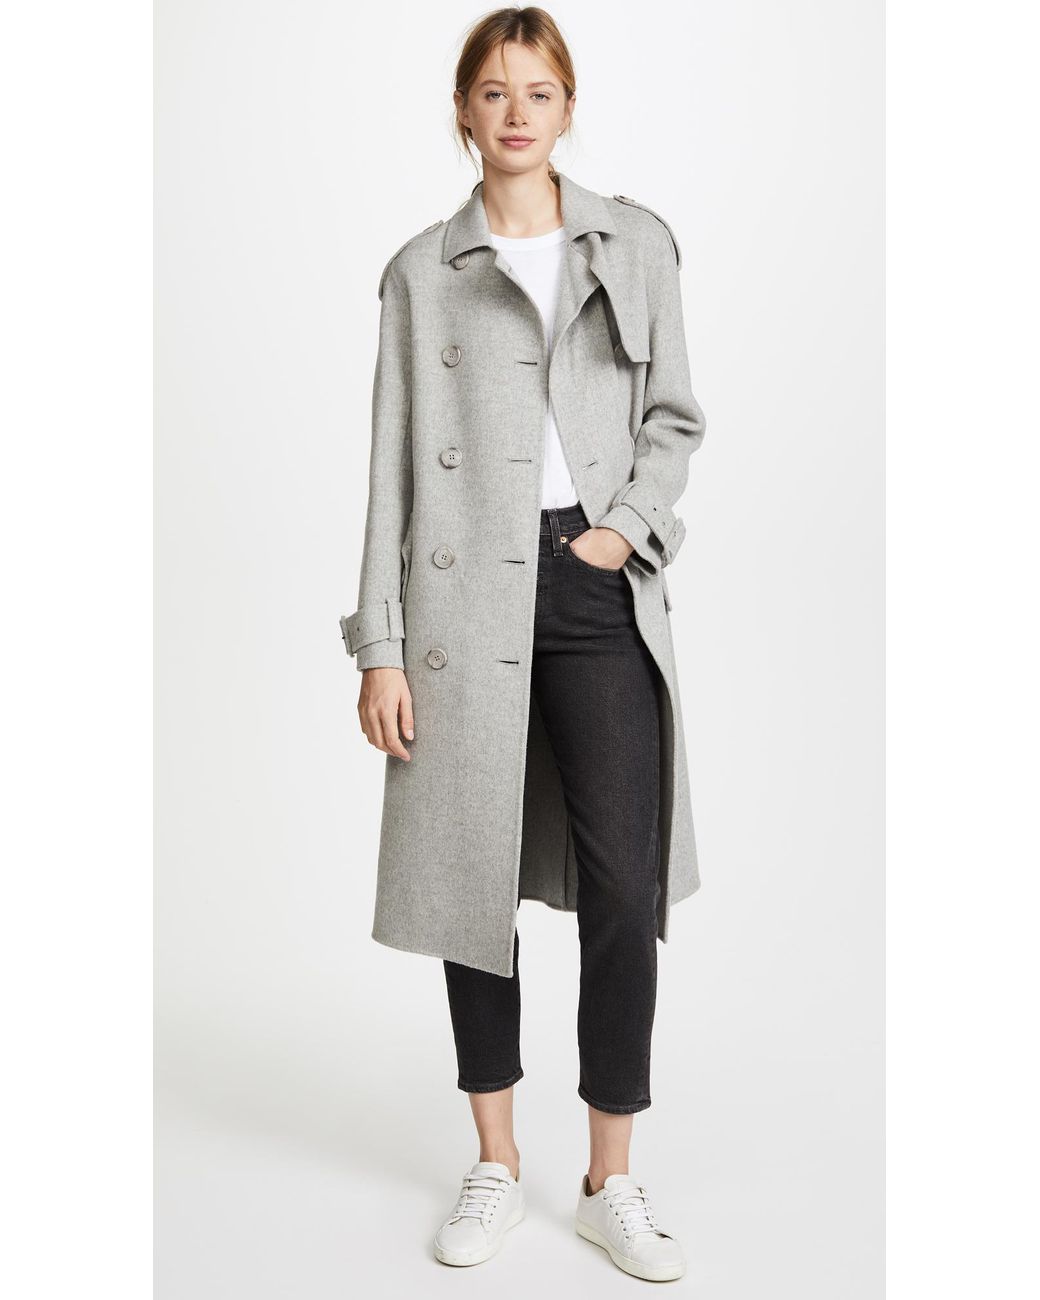 Theory Statement Trench Coat in Gray | Lyst